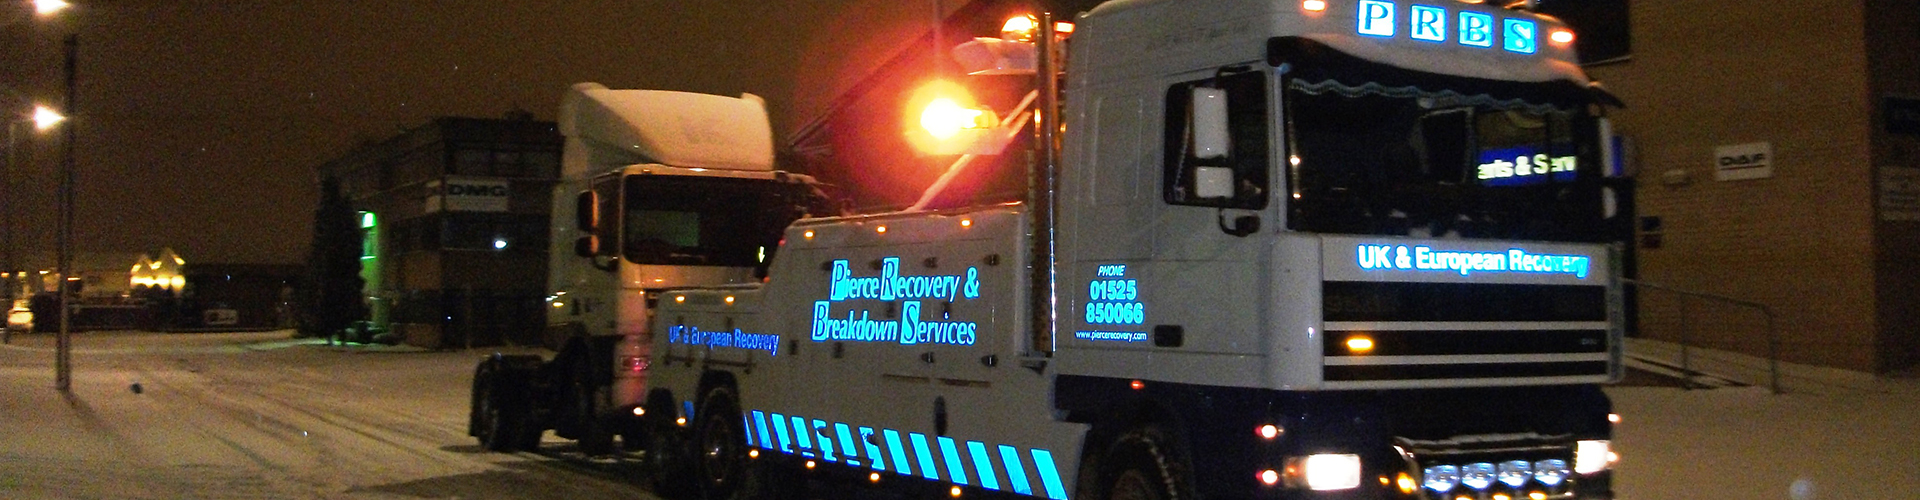 Pierce Recovery & Breakdown Services  Contact Banner